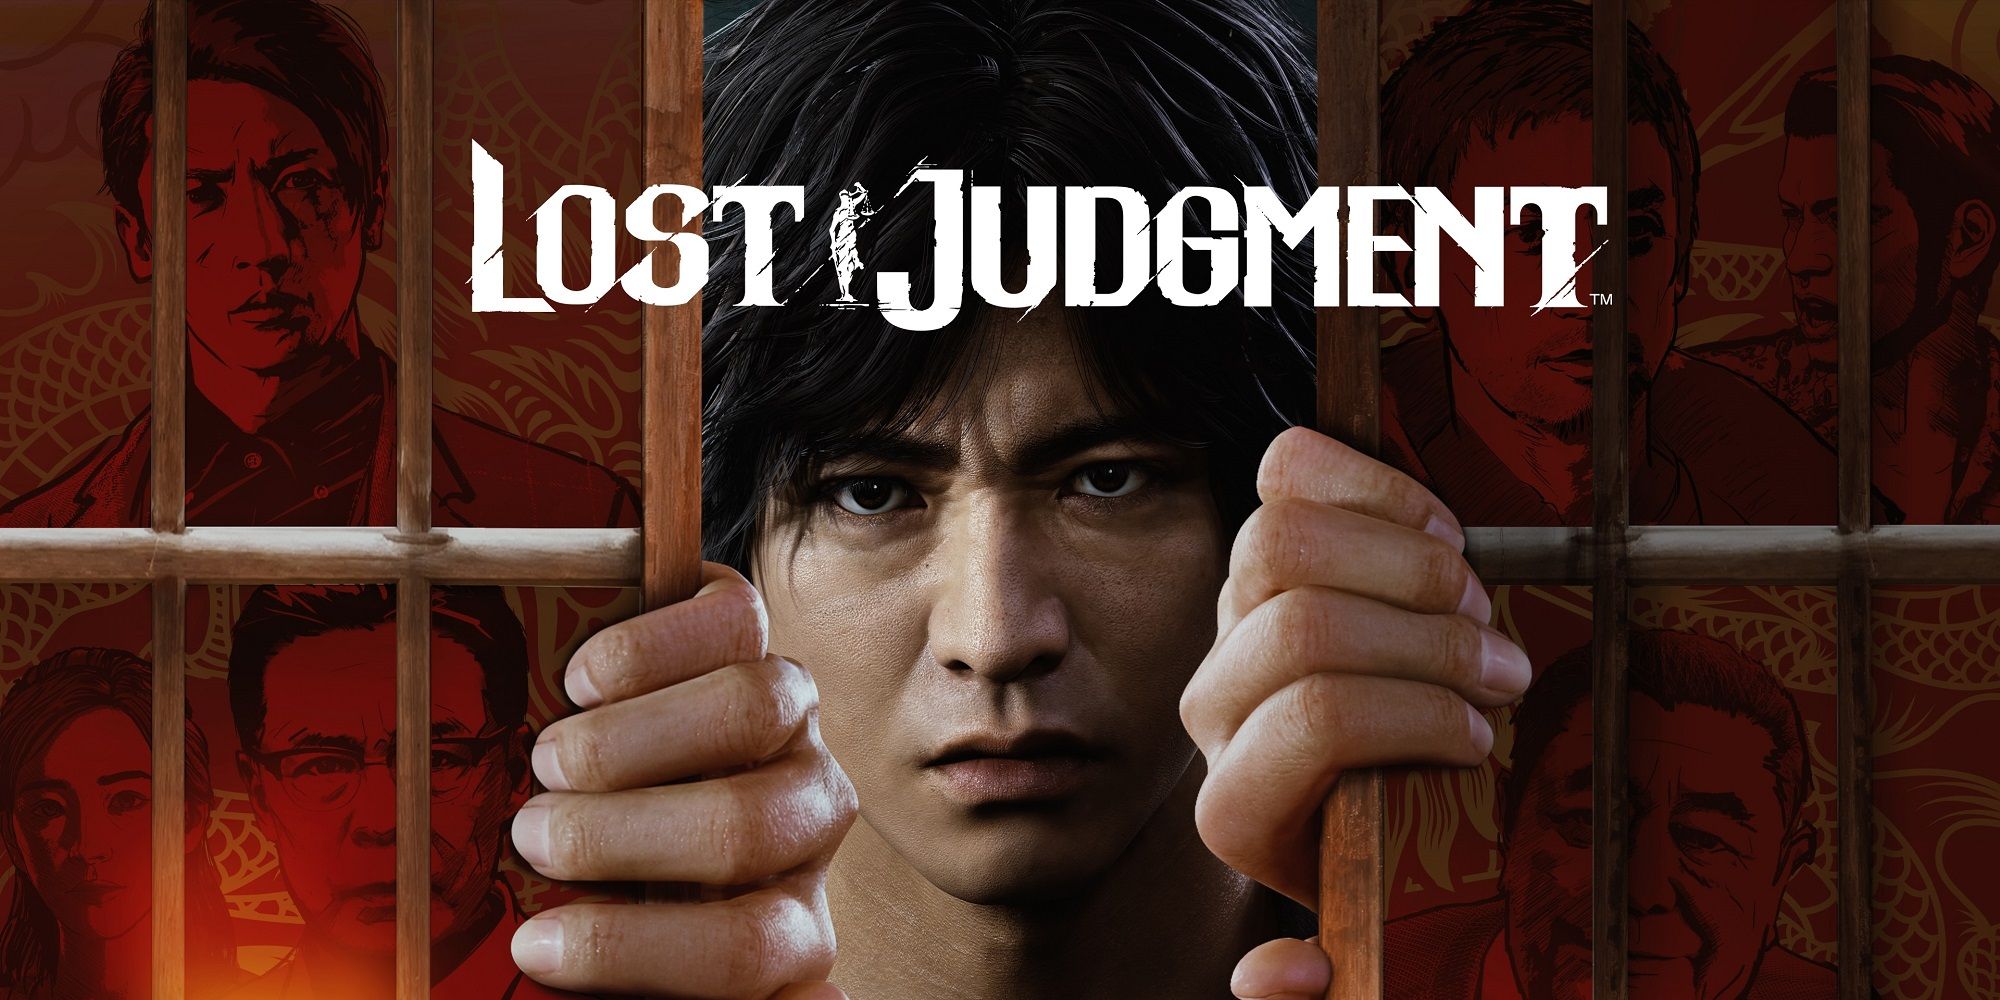 Lost Judgment official poster showing the protagonist